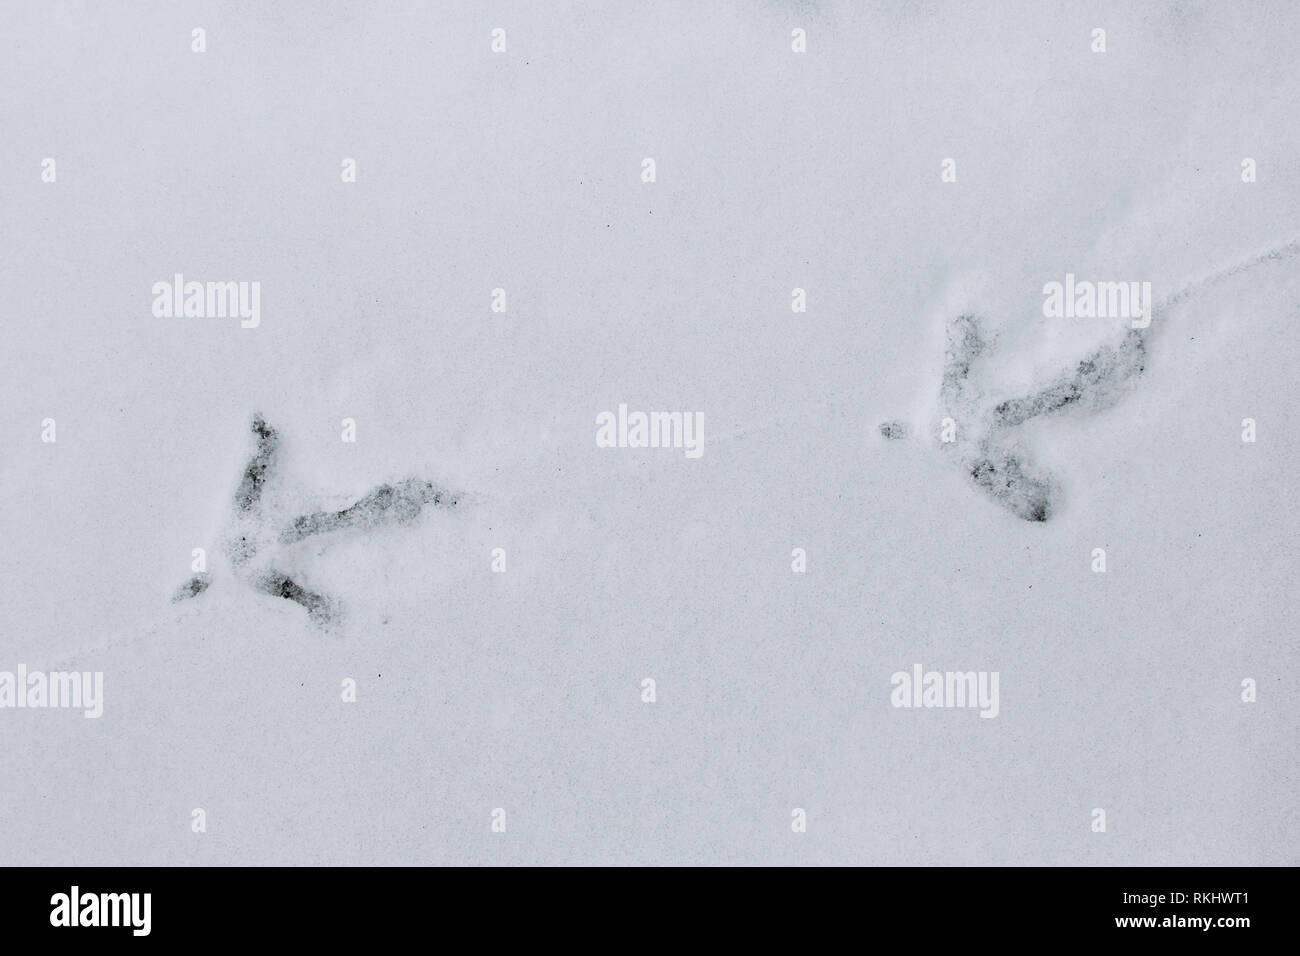 Common pheasant / Ring-necked pheasant (Phasianus colchicus) footprints in the snow in winter Stock Photo